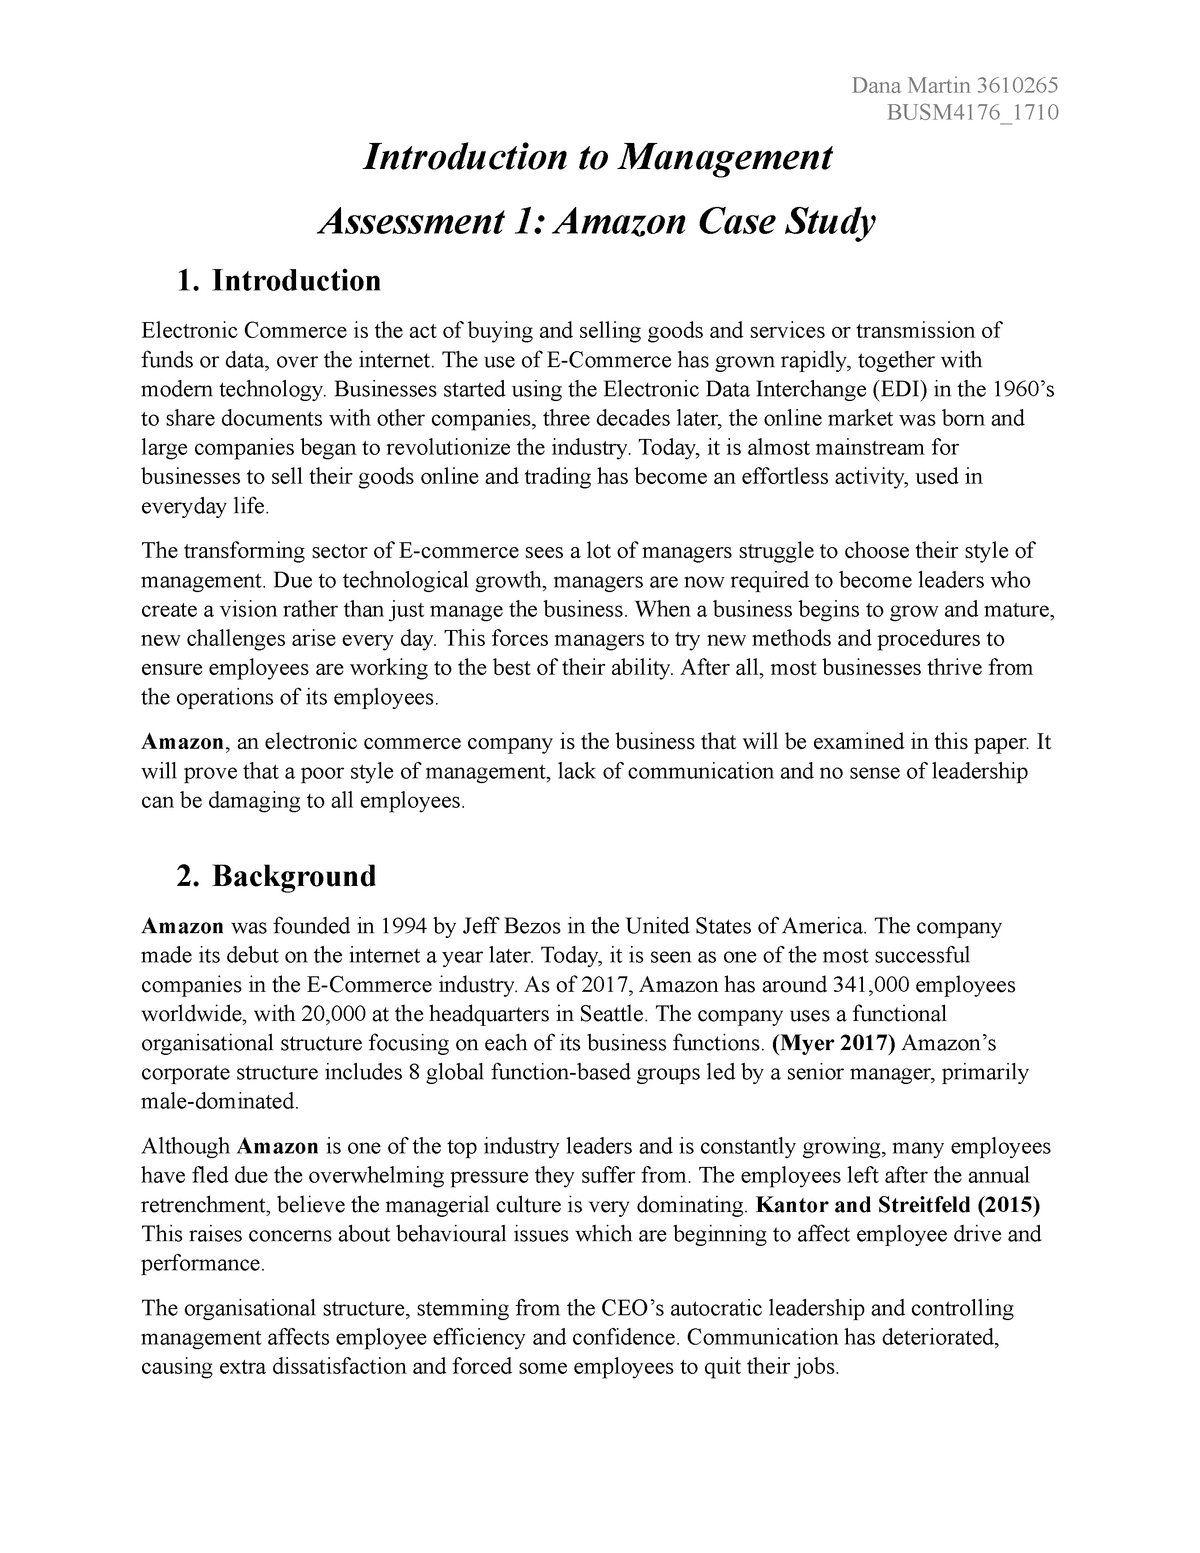 introduction to a case study assignment